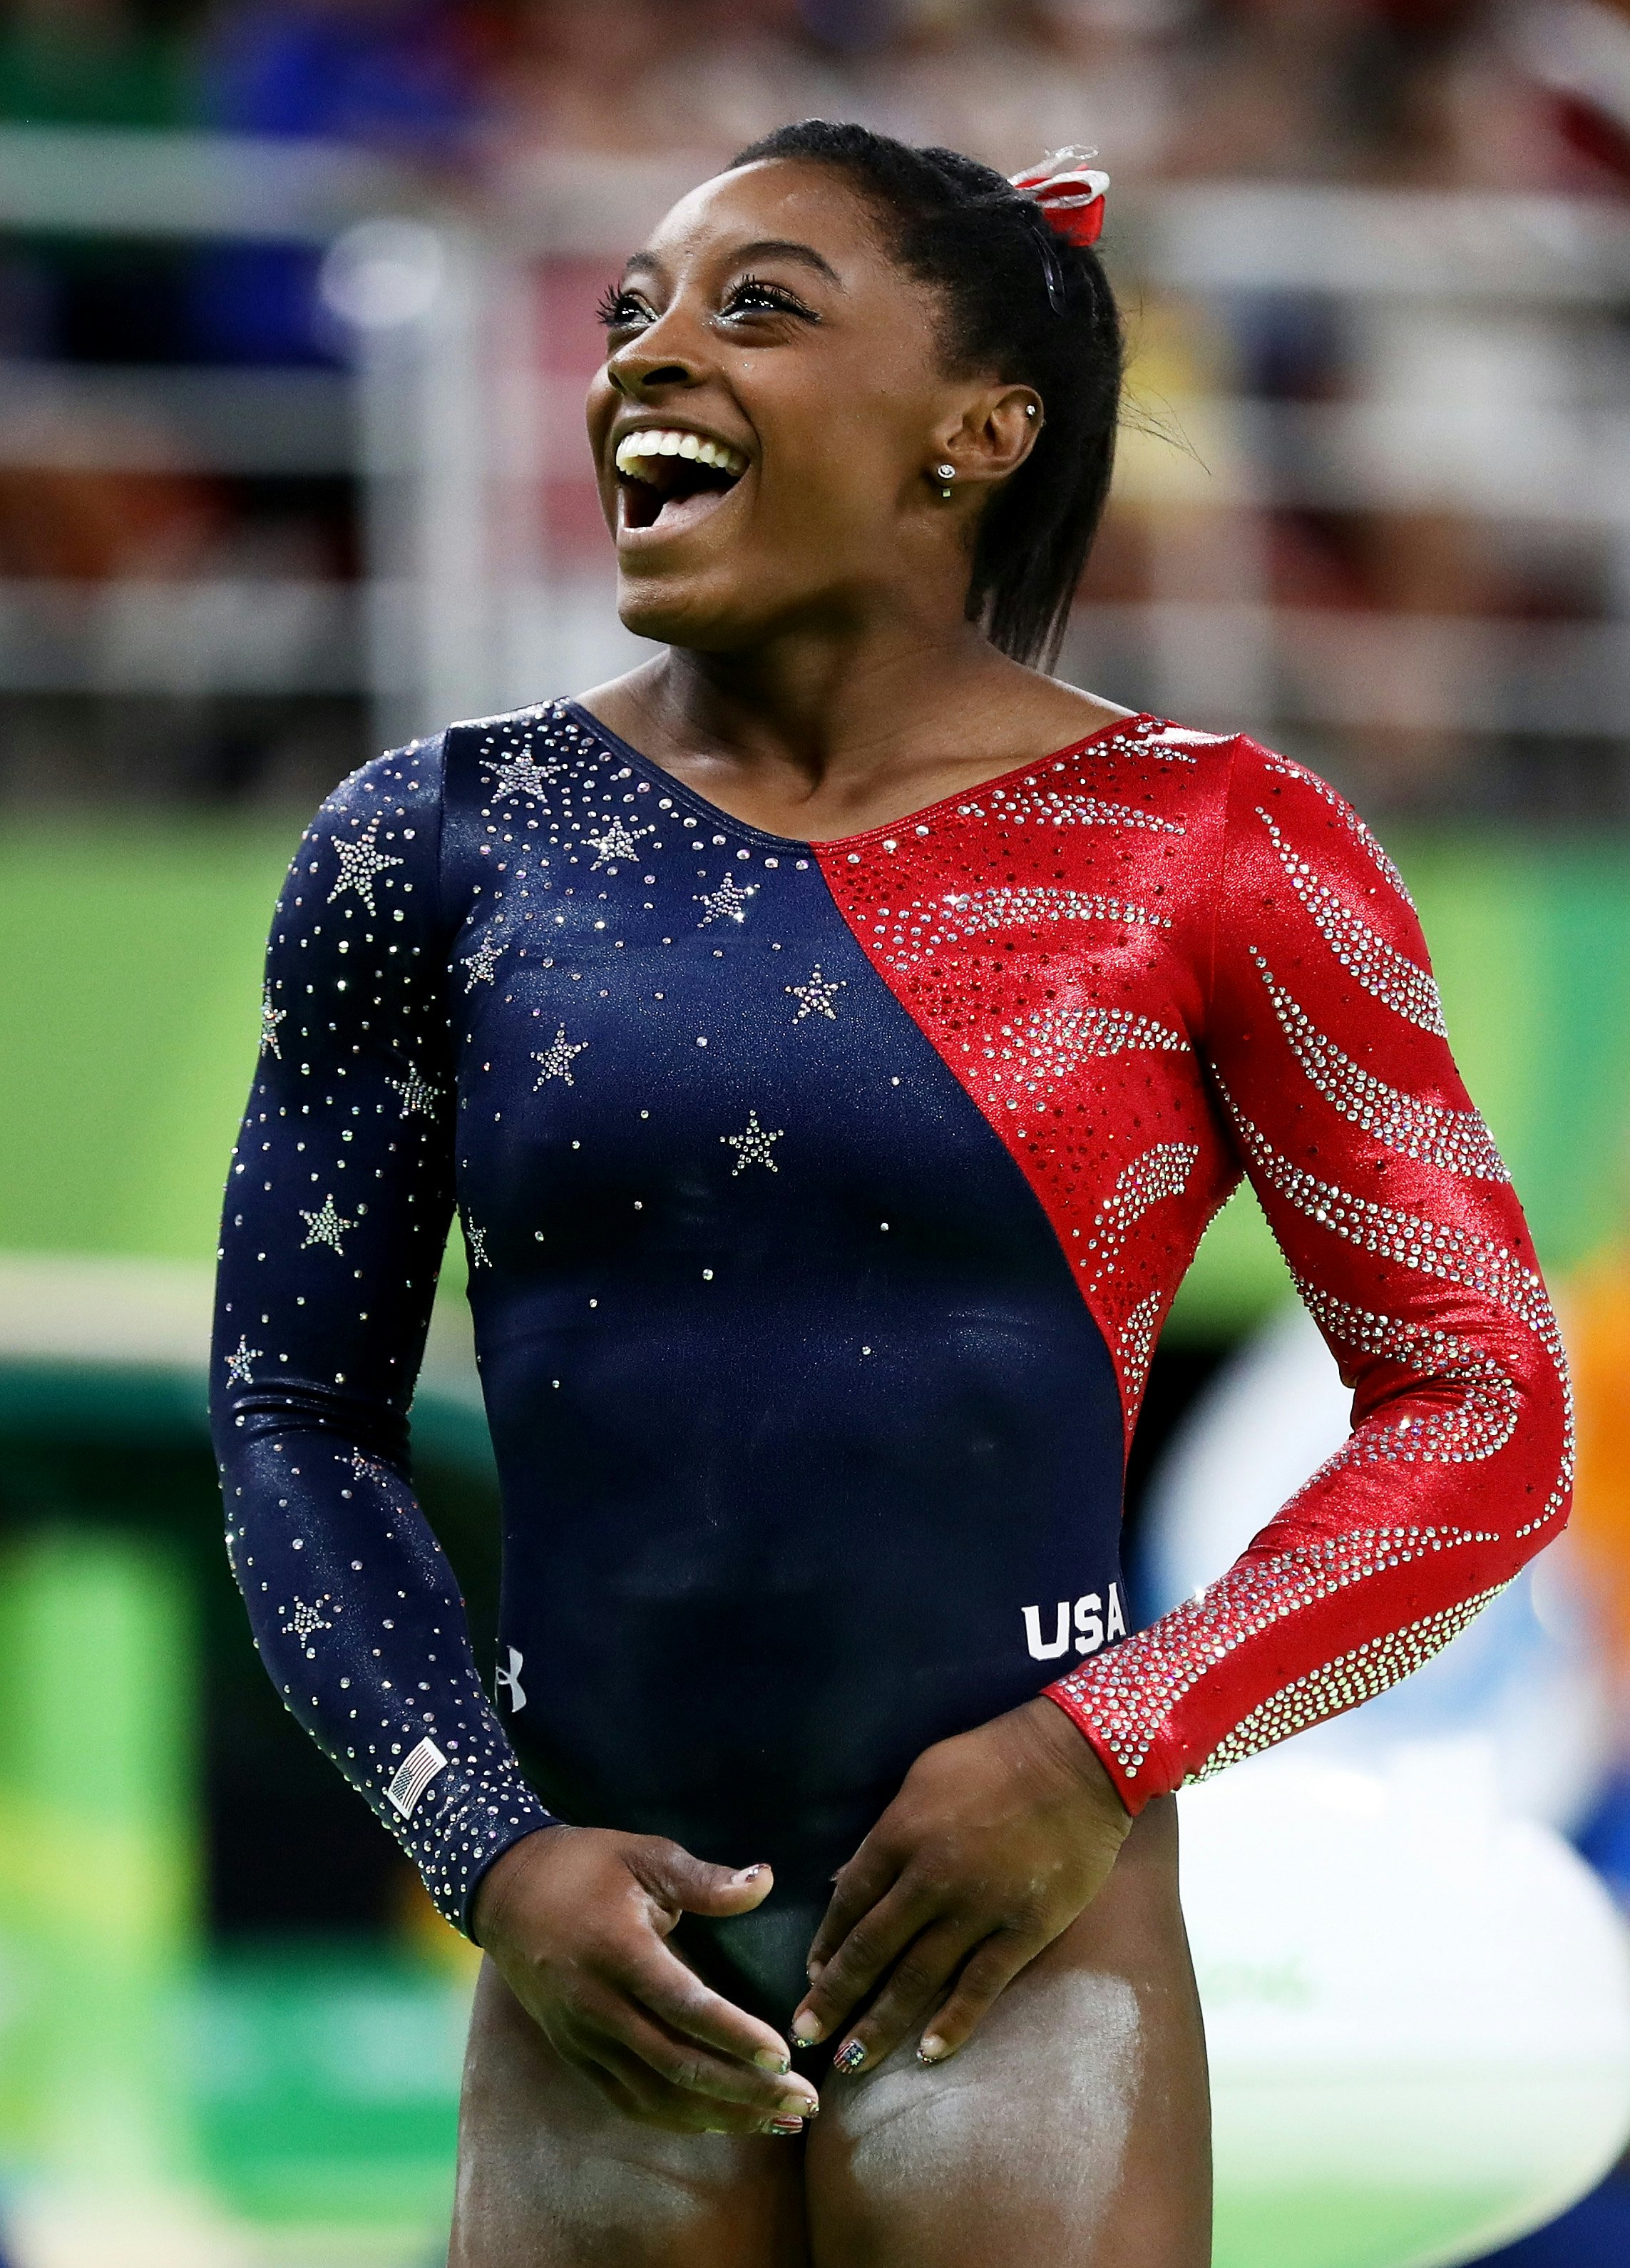 How Much Do the Olympic Gymnastics Uniforms Cost?